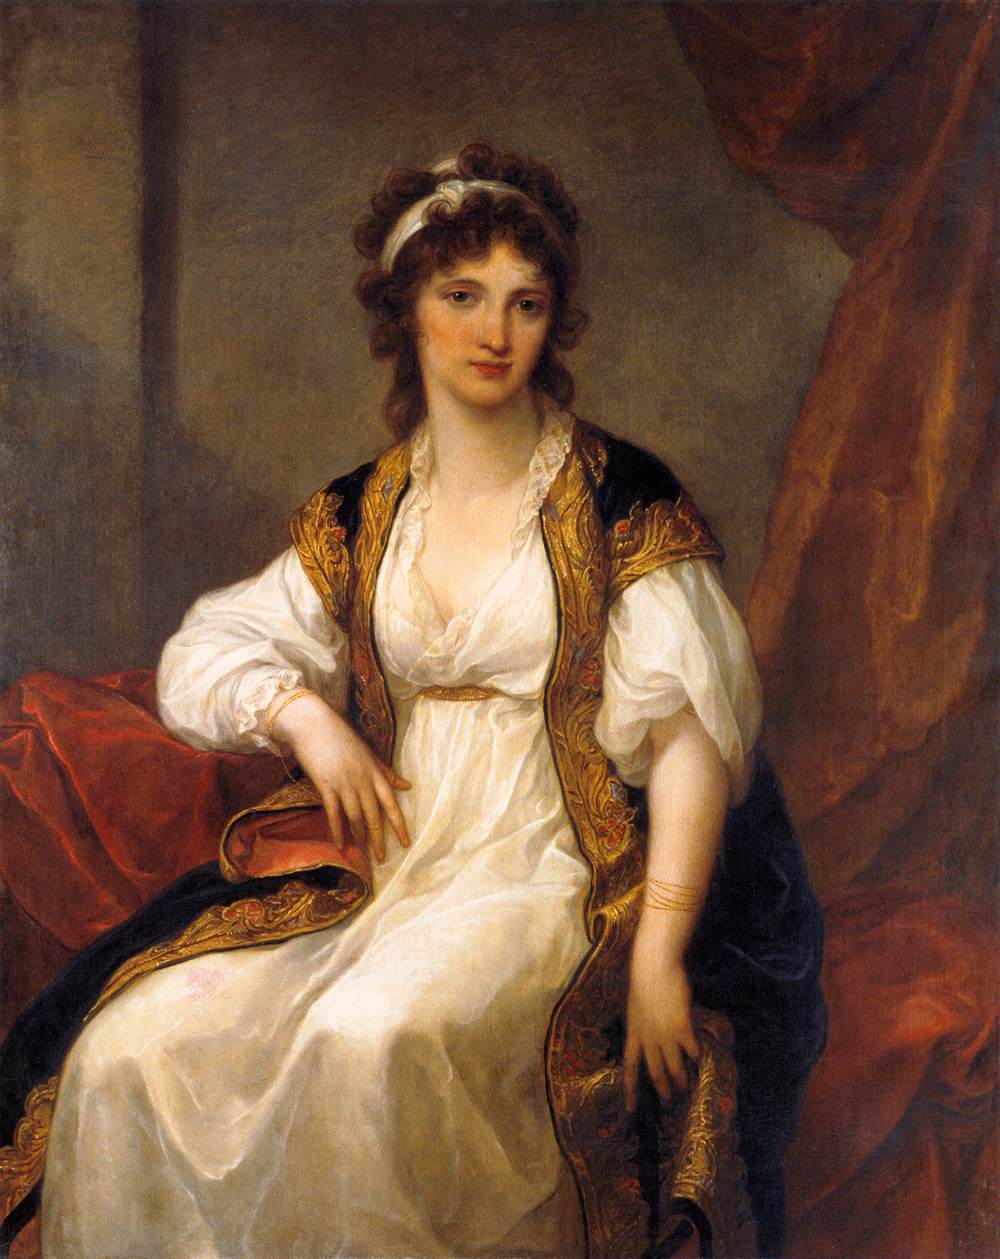 File:Angelica Kauffmann, Portrait of a Young Woman, 1781.jpg